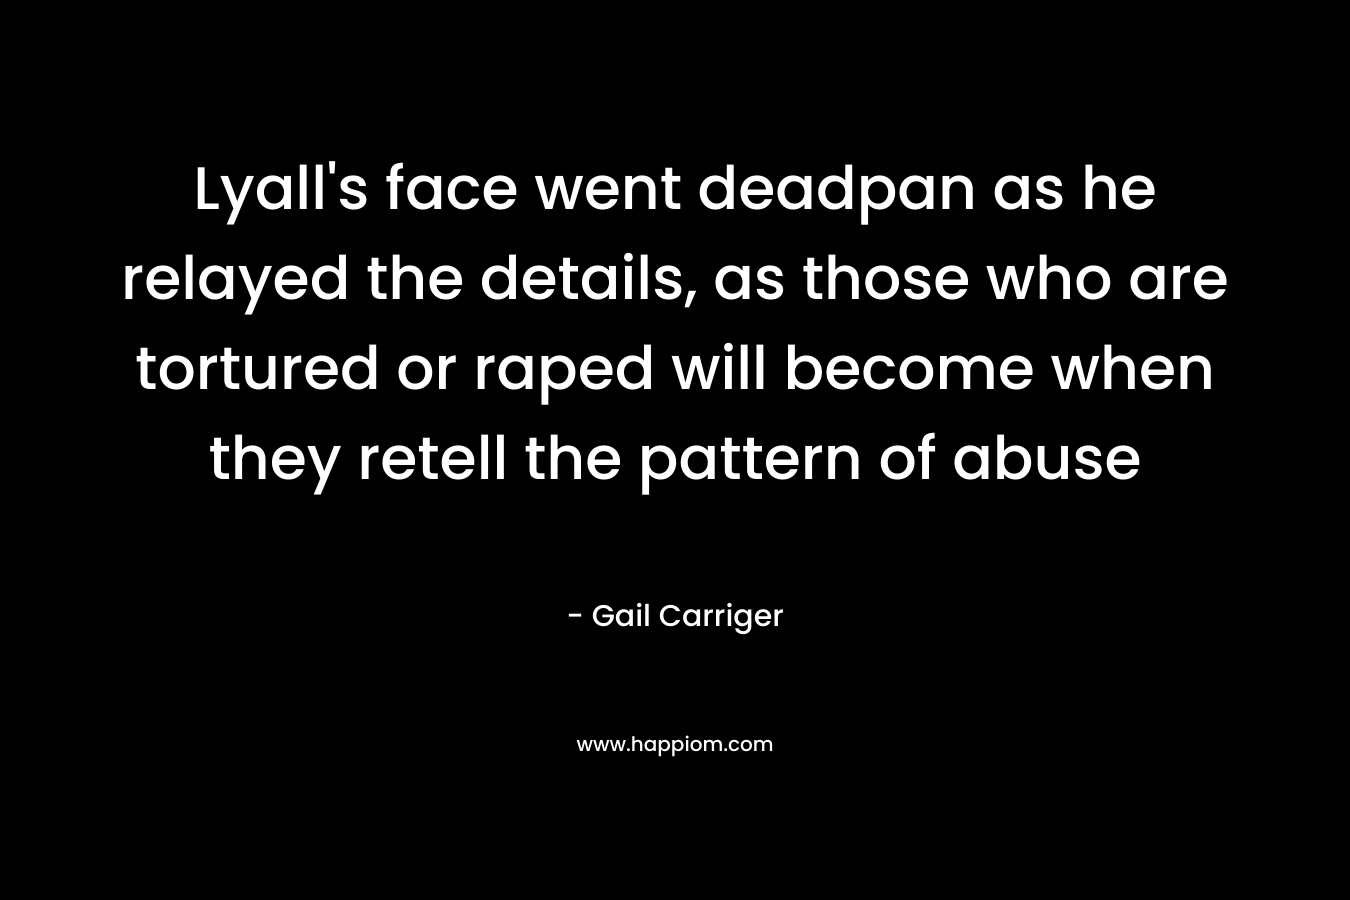 Lyall’s face went deadpan as he relayed the details, as those who are tortured or raped will become when they retell the pattern of abuse – Gail Carriger